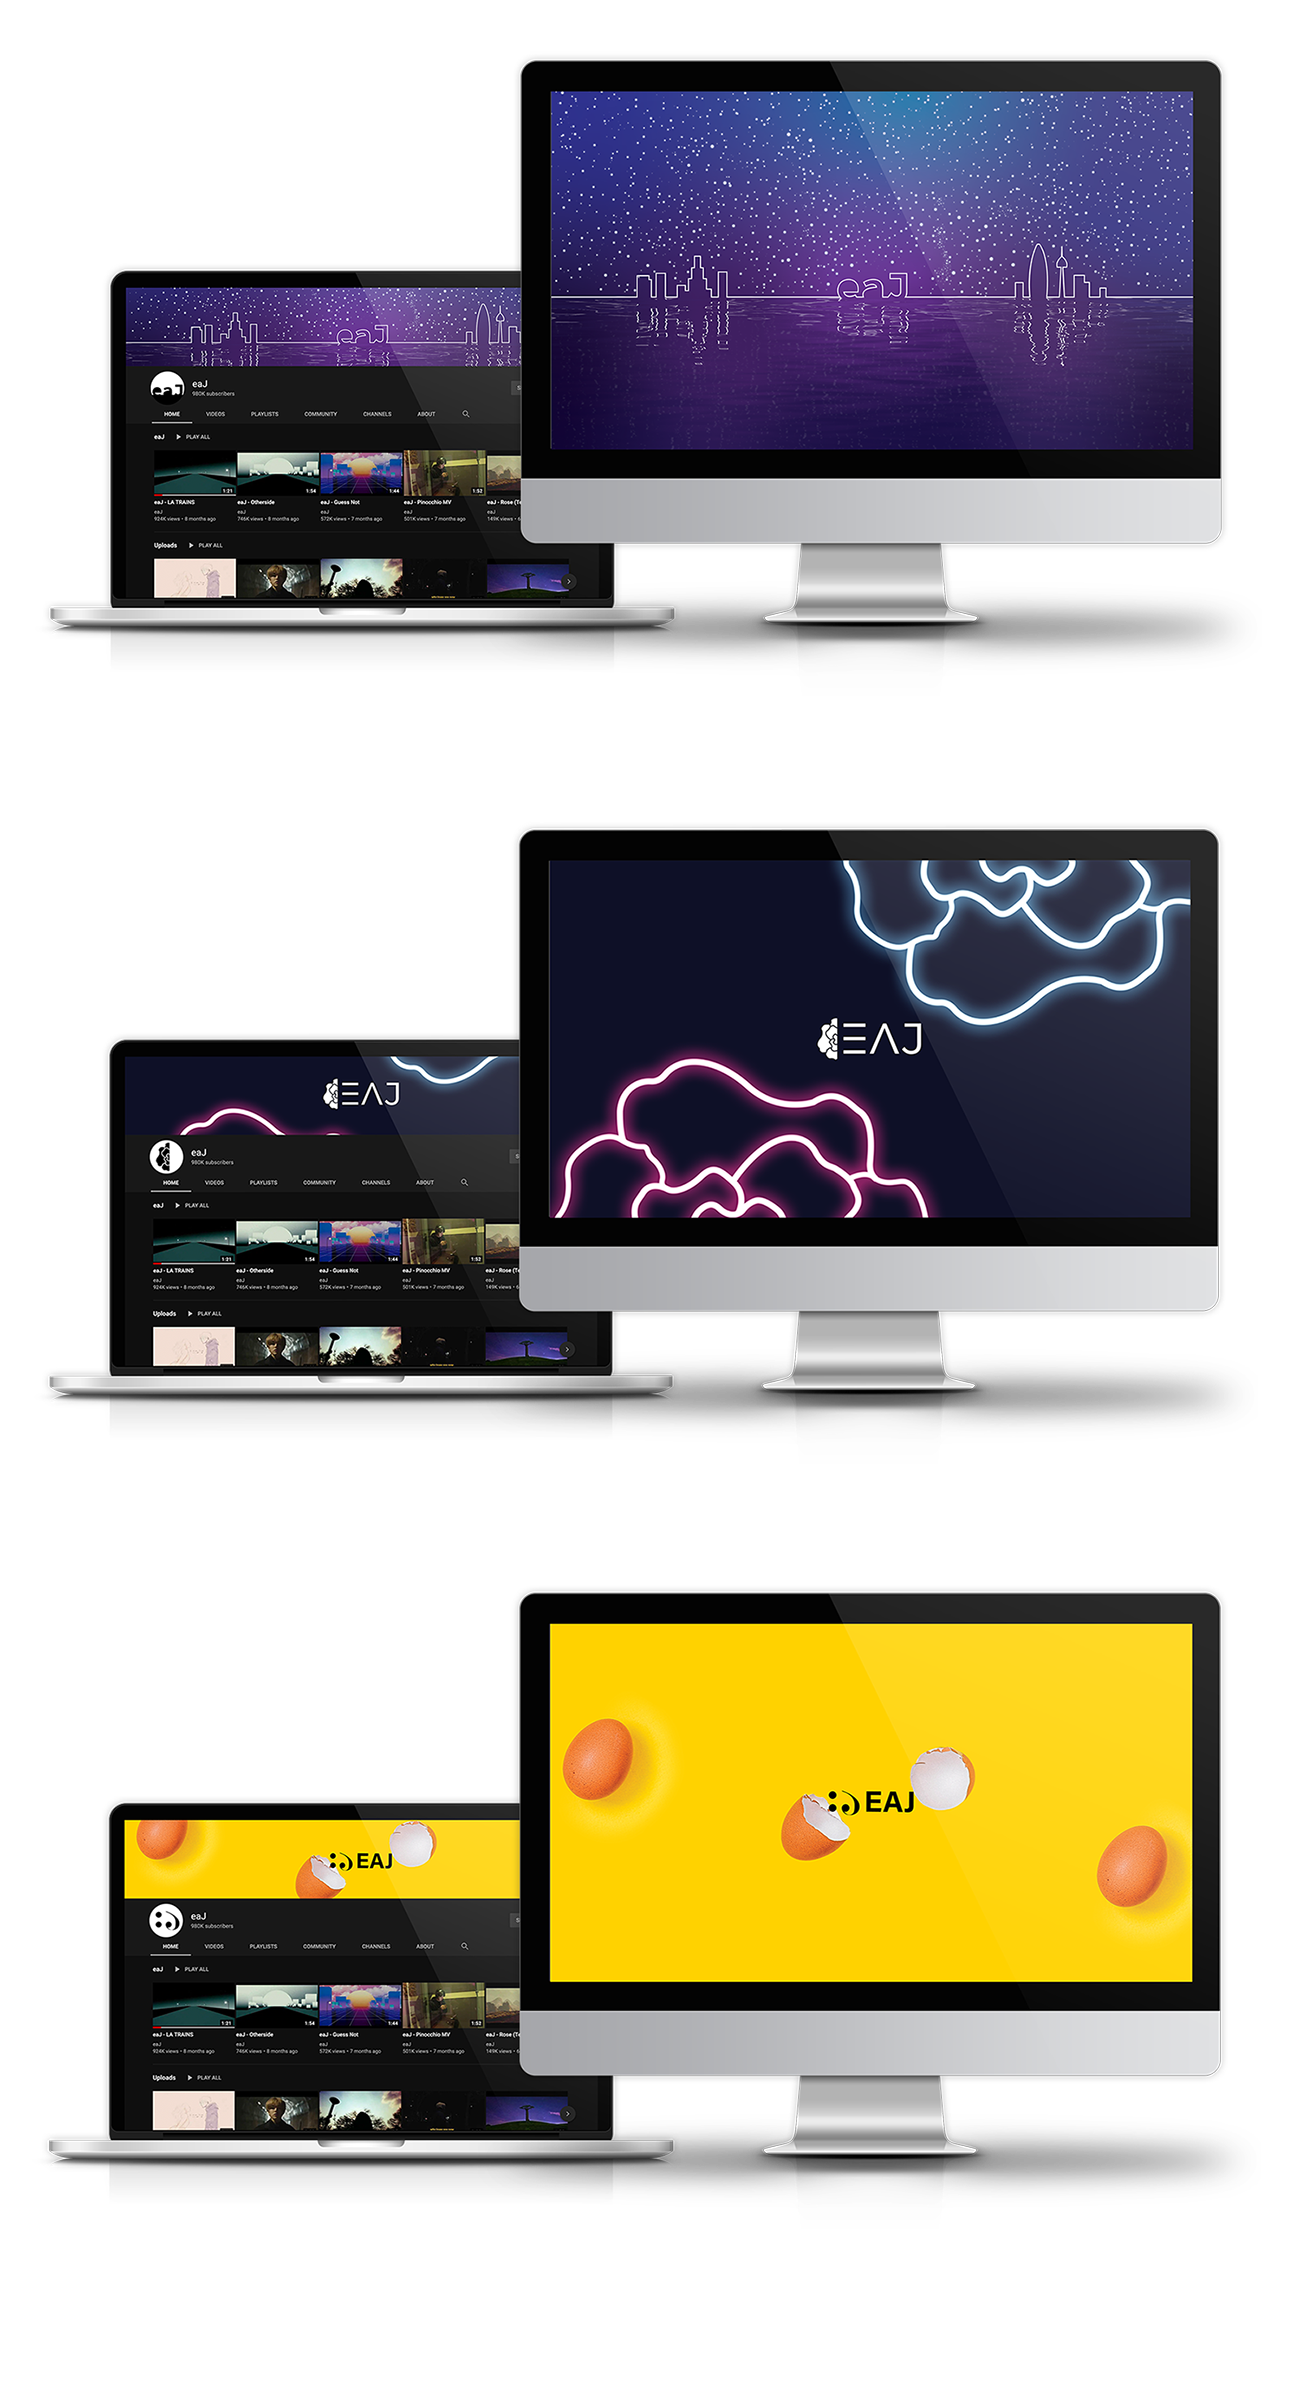 Mockups featuring laptop and desktop versions of all three banner styles.